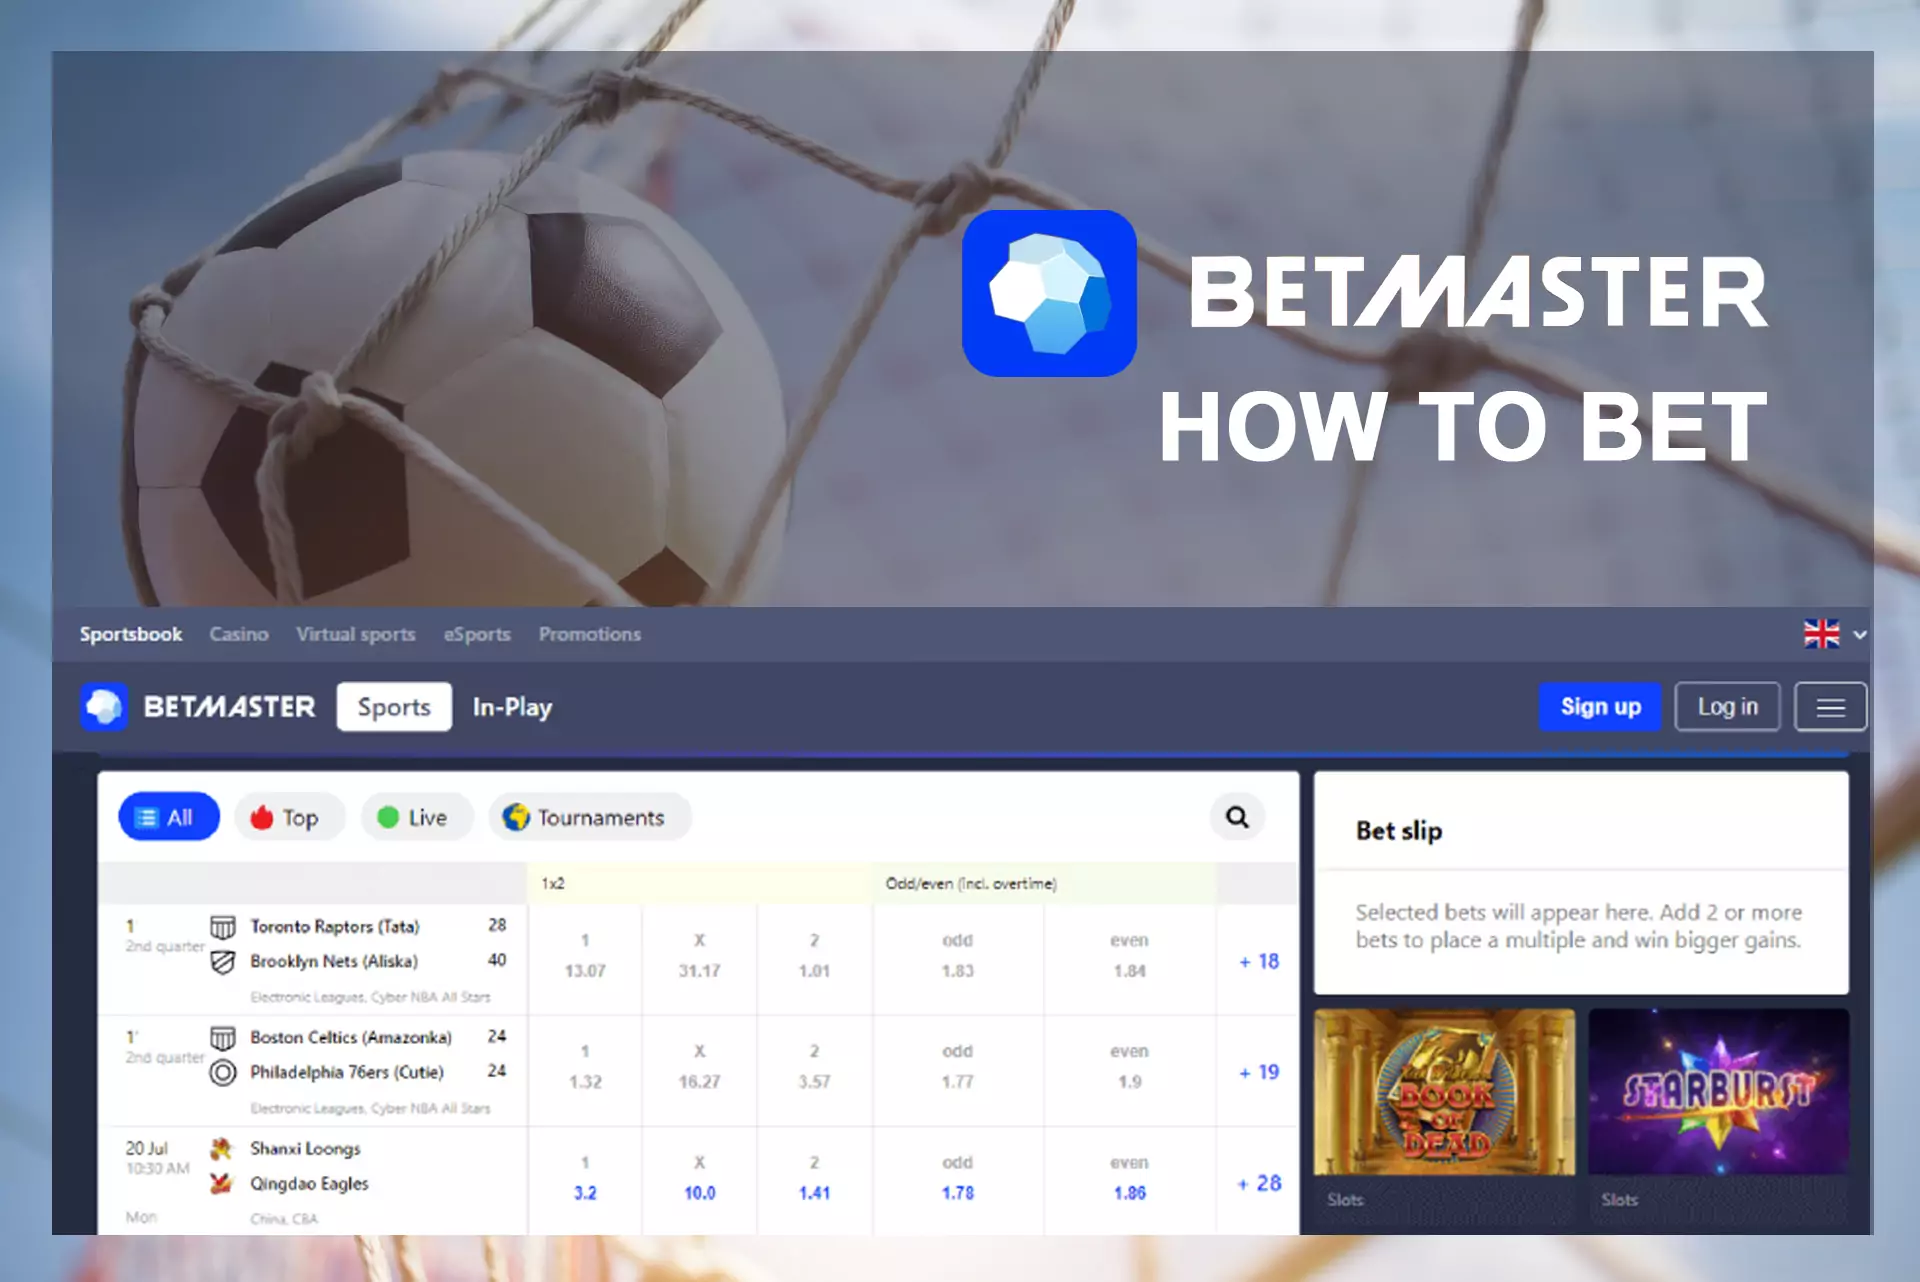 Learn our tips on how to start betting on Betmaster.